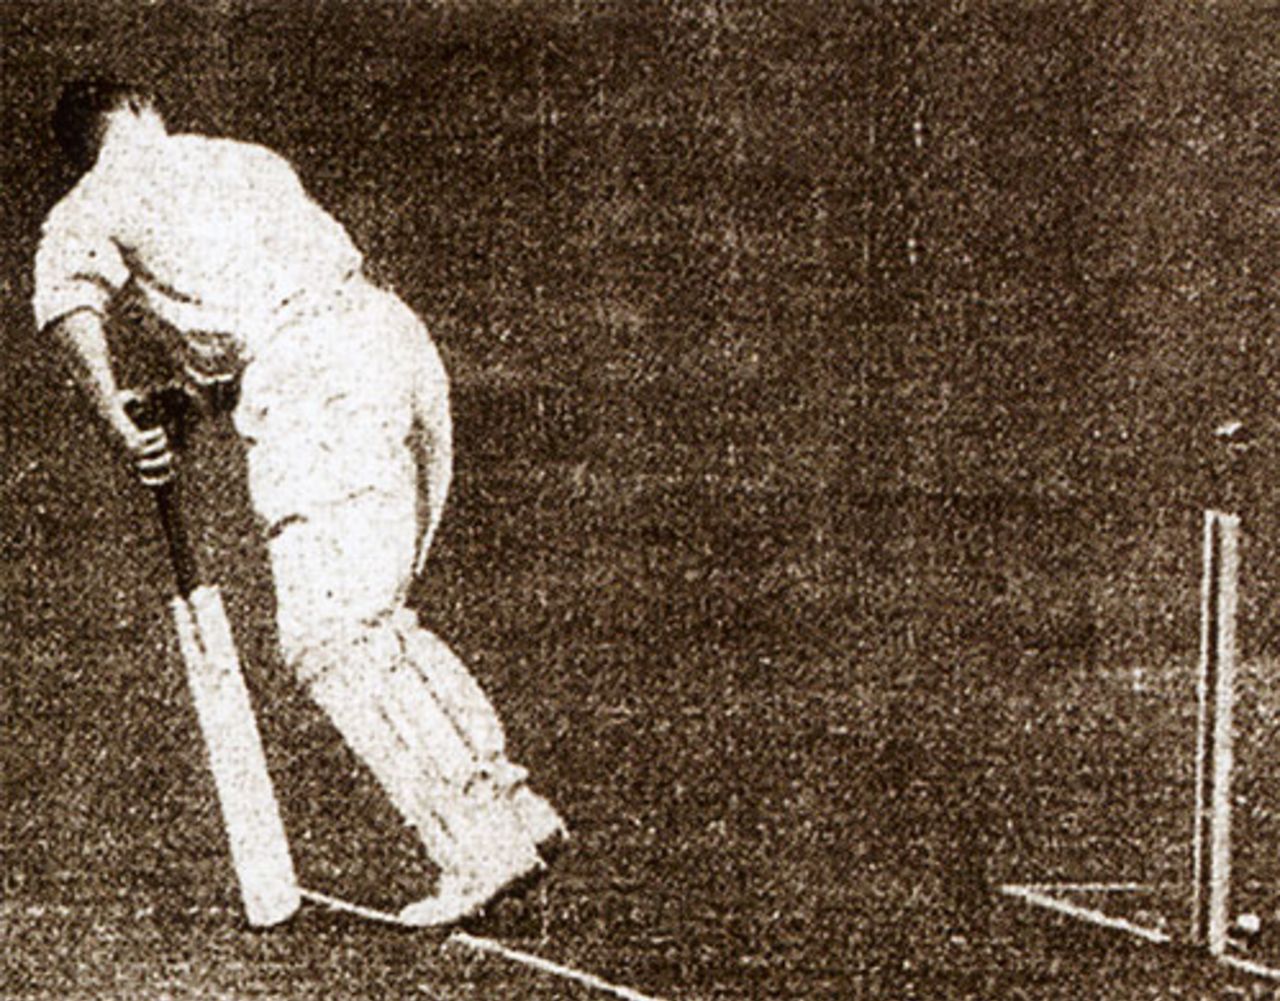 Percy Holmes loses his off stump to Mohammad Nissar, England v India, Lord's, June 25, 1932